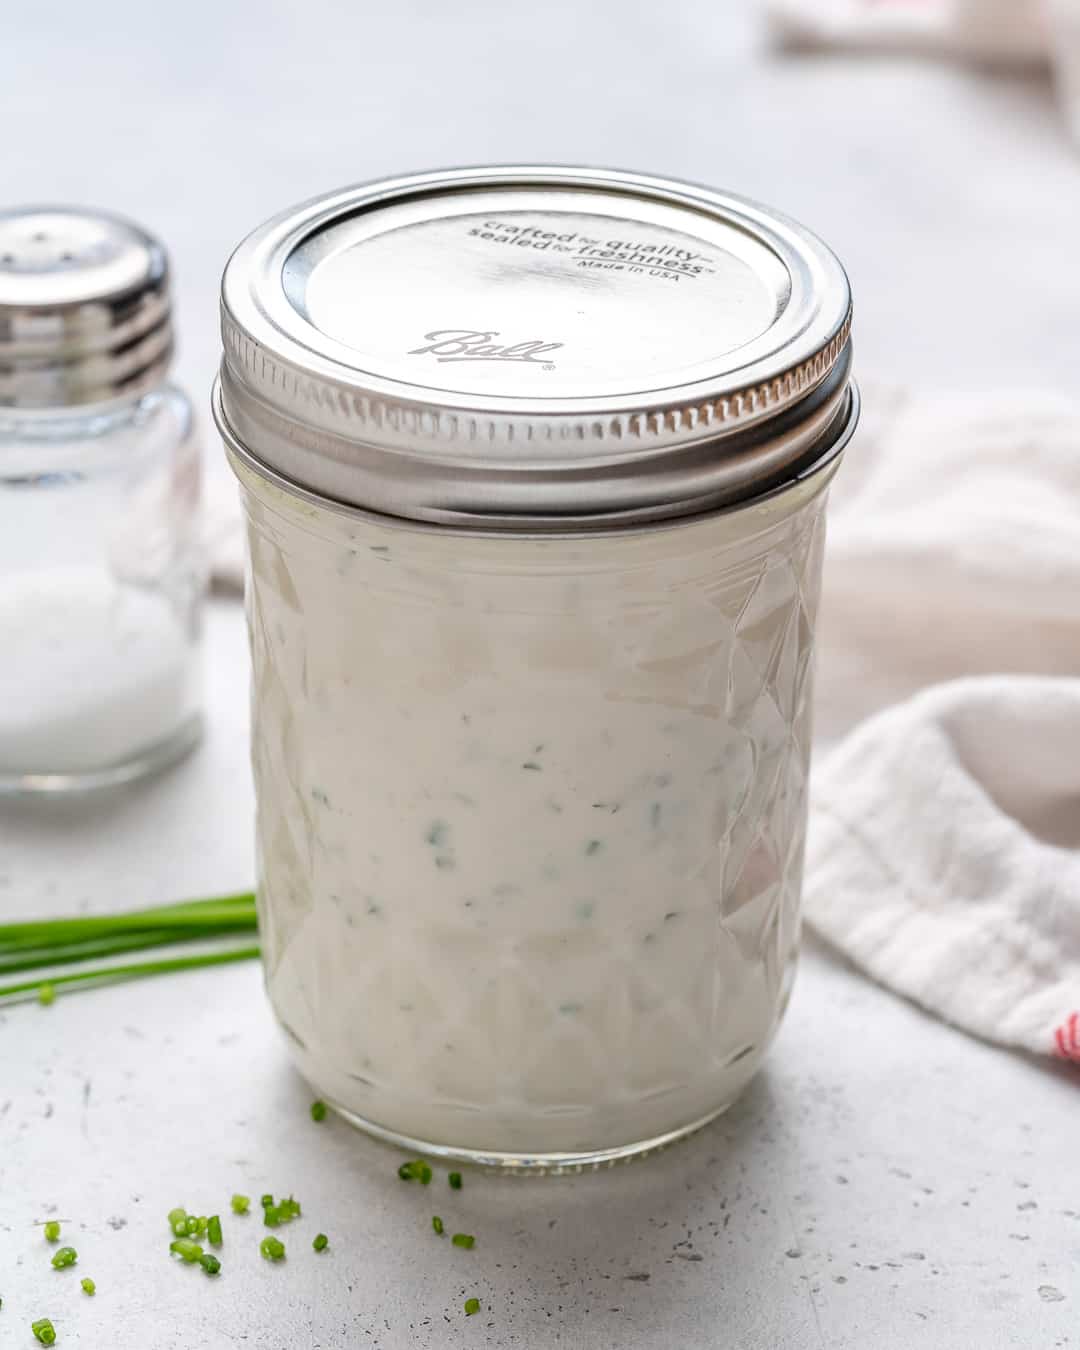 Homemade Ranch Dressing in a jar on the counter.